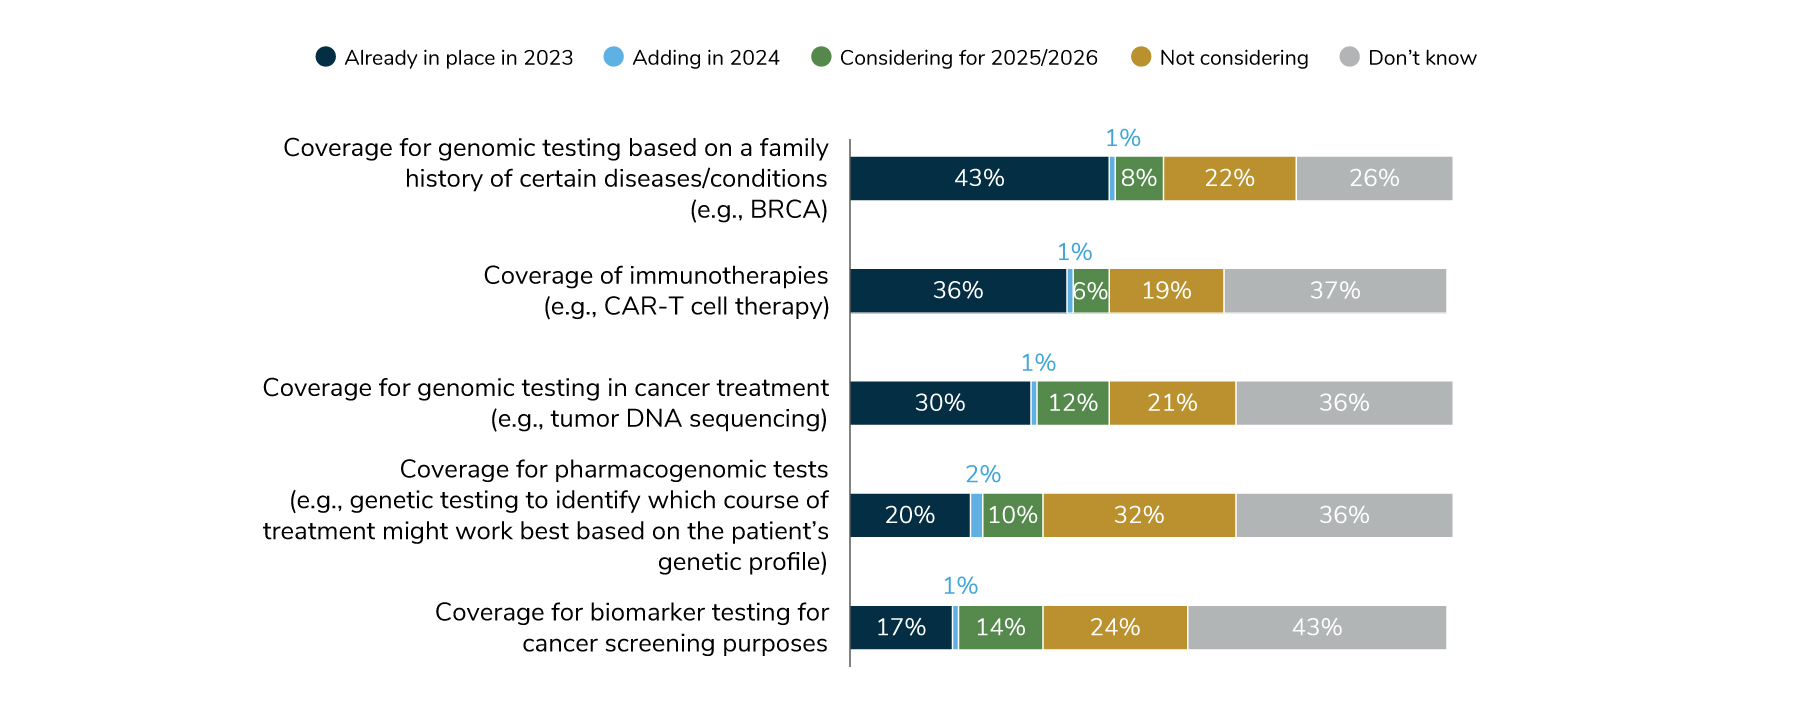 In 2024, employers will offer the following aspects of precision medicine, including: coverage for genomic testing based on family history (44%); coverage for immunotherapies (37%); coverage for genetic testing in cancer treatment (31%); coverage for pharmacogenomic test; and coverage for biomarker testing for cancer screening purposes (18%).